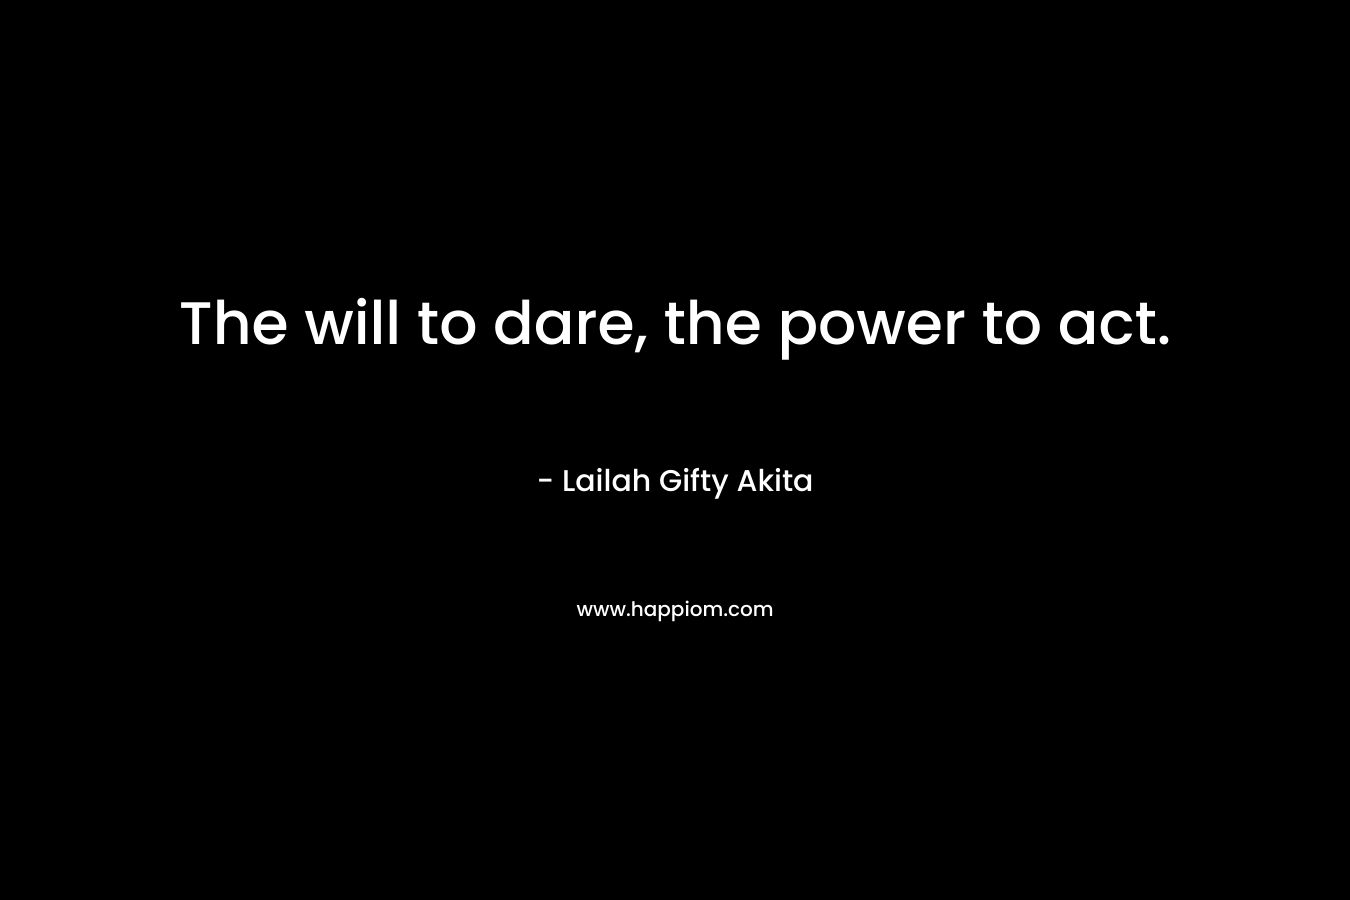 The will to dare, the power to act.